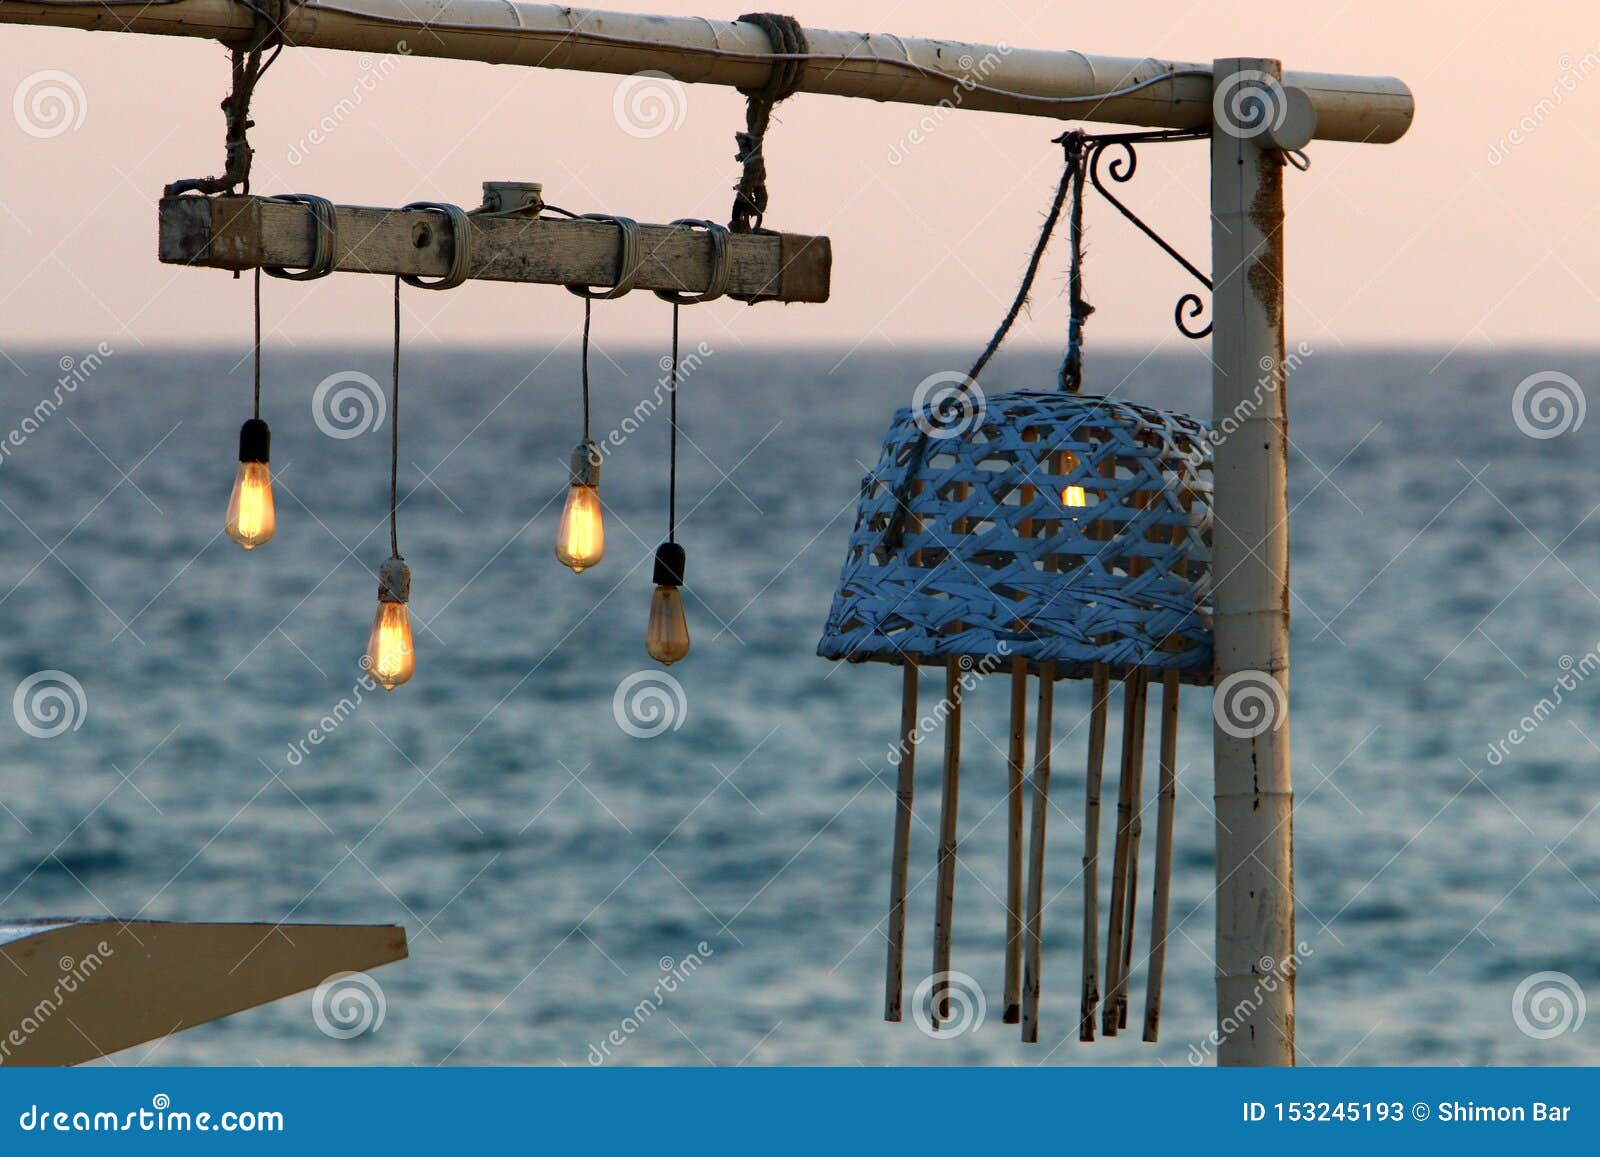 Lantern for Lighting in a City Park in Israel Stock Image - Image of ...